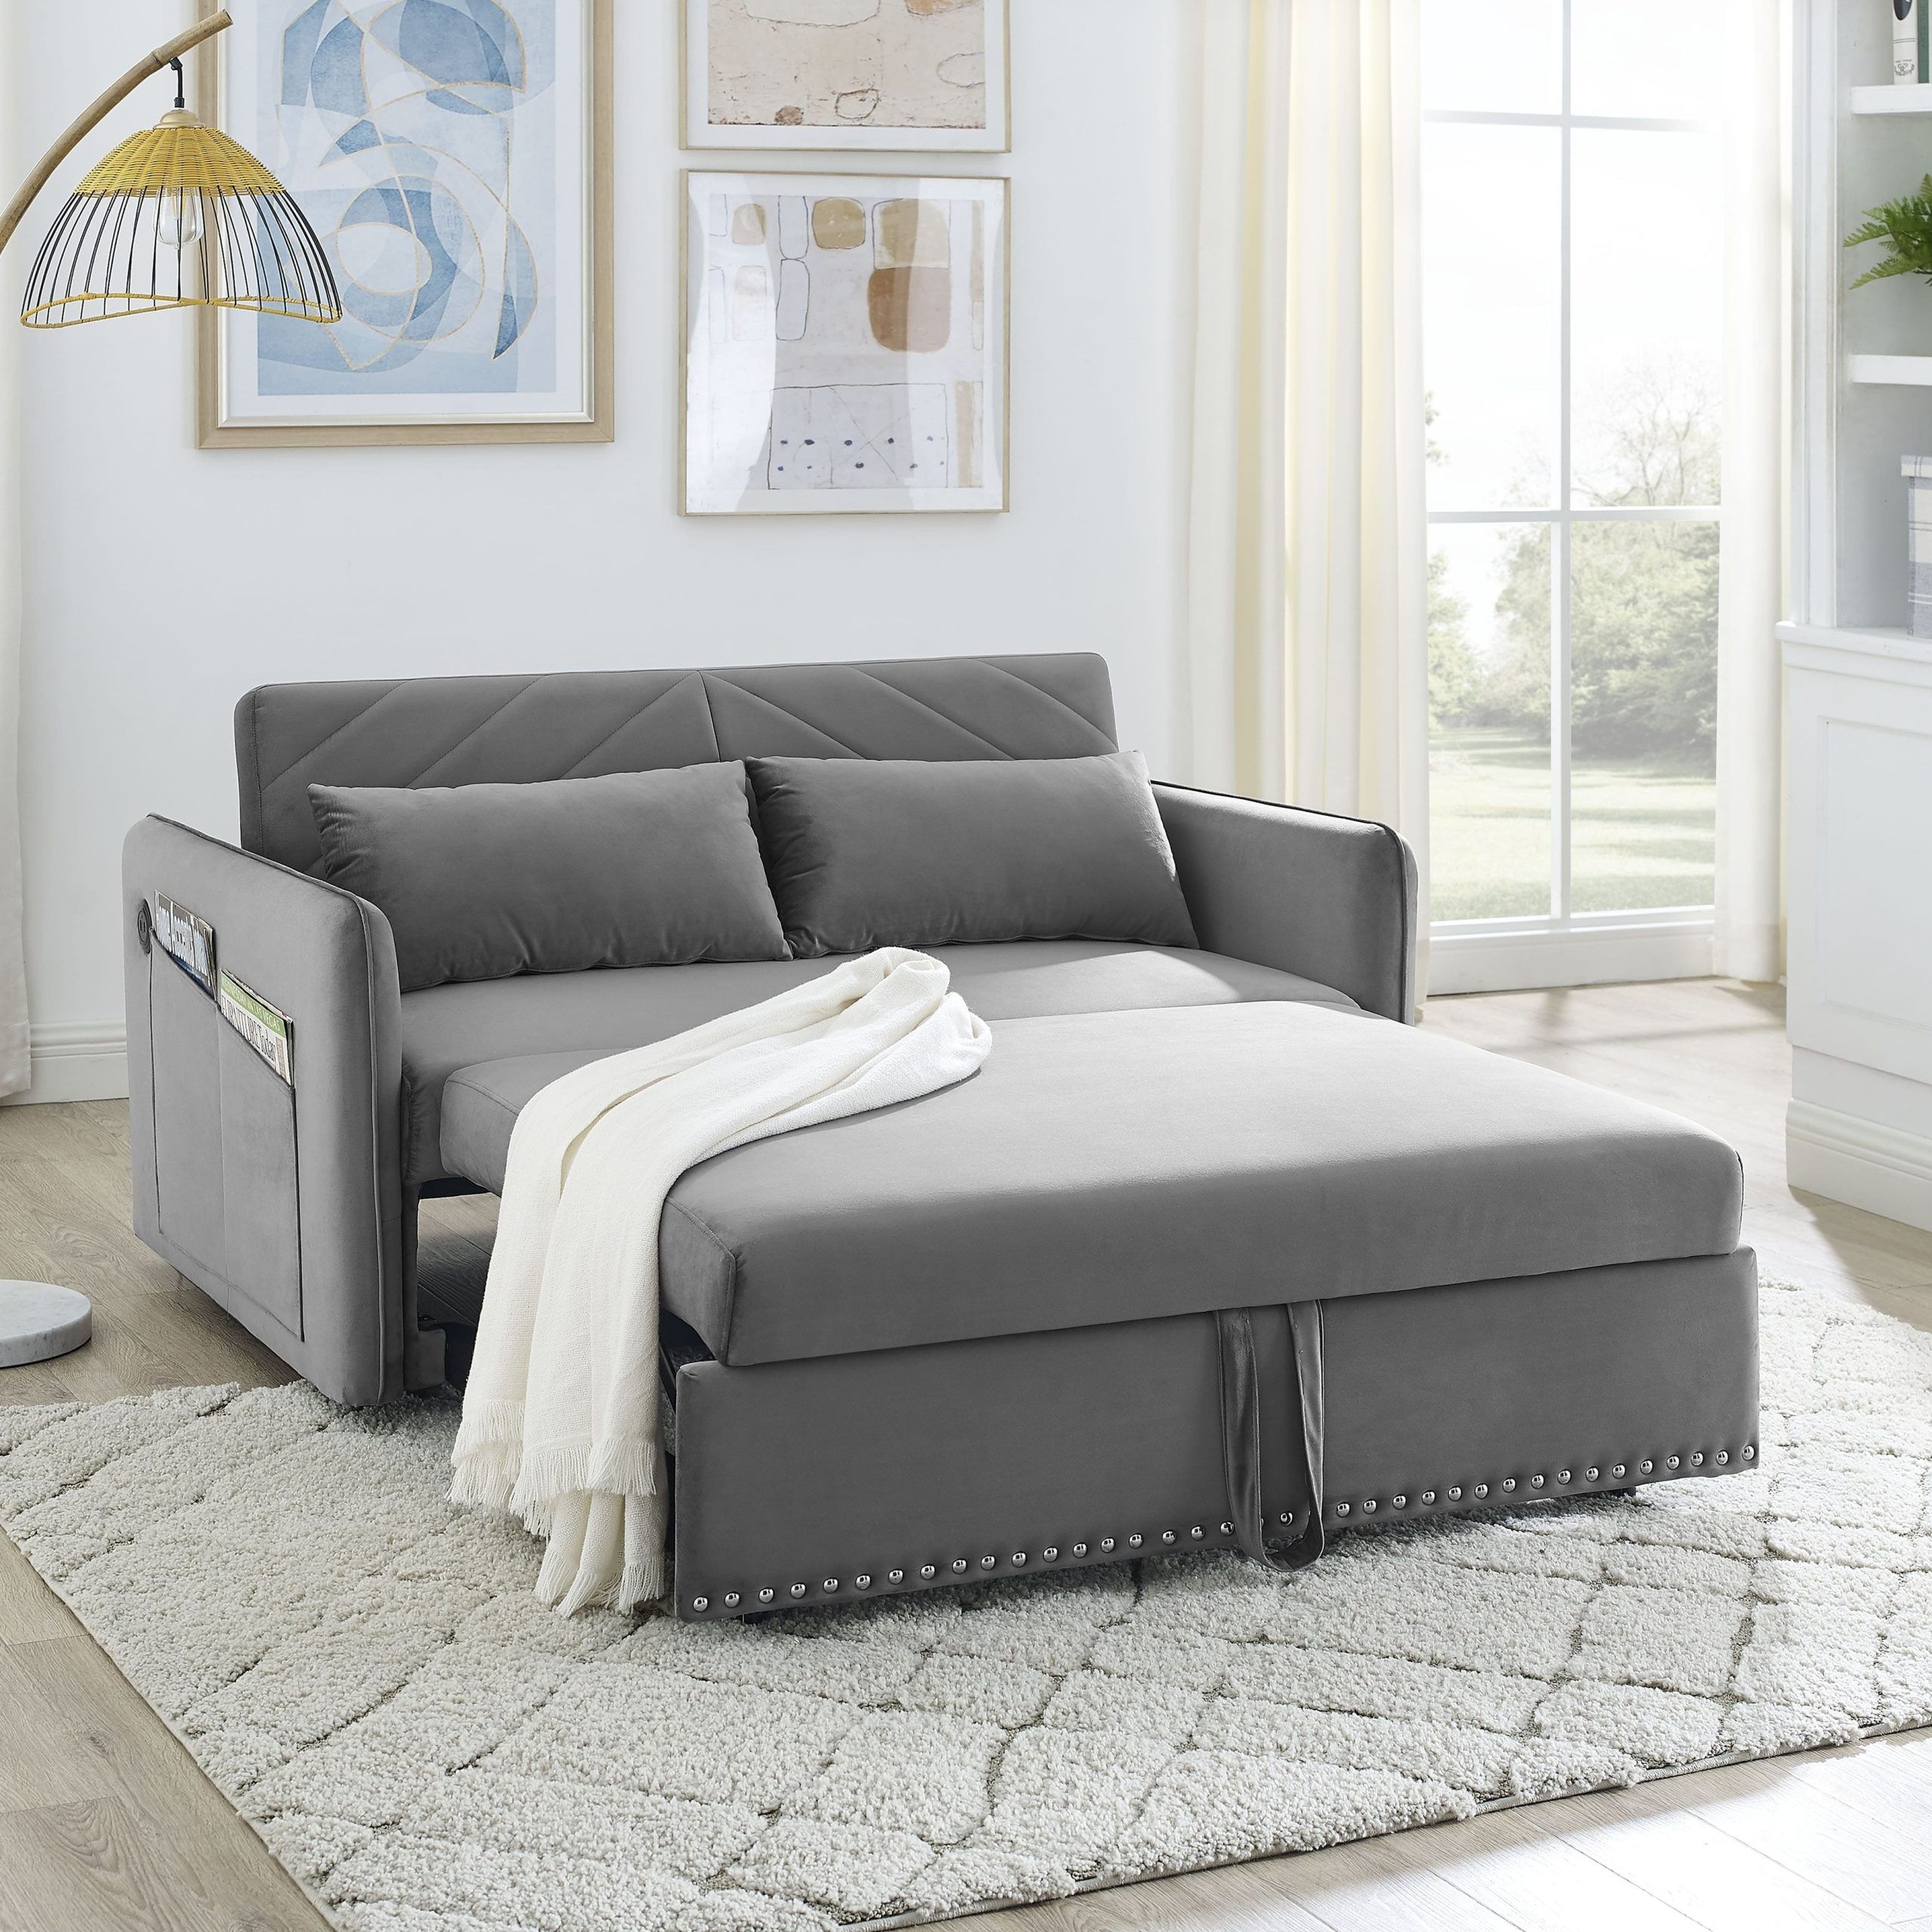 Velvet Pull Out Sleeper Sofa , 3 In 1 Adjustable Sleeper With Pull Out Bed,  2 Lumbar Pillows And Side Pocket – Bed Bath & Beyond – 38084240 Within 3 In 1 Gray Pull Out Sleeper Sofas (Photo 3 of 15)